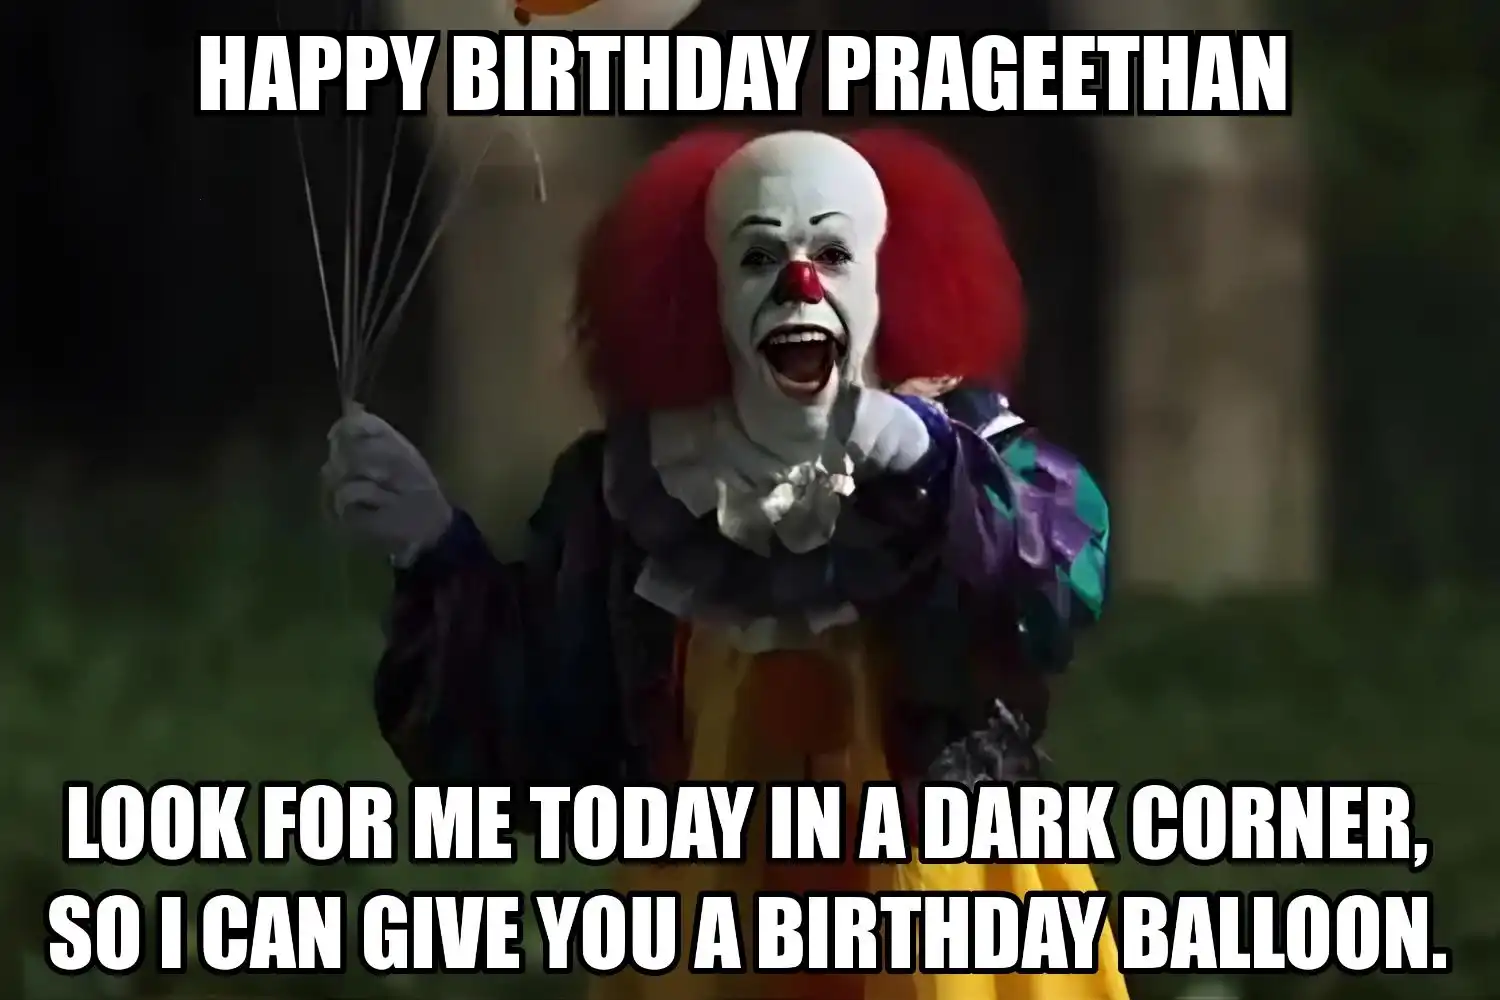 Happy Birthday Prageethan I Can Give You A Balloon Meme